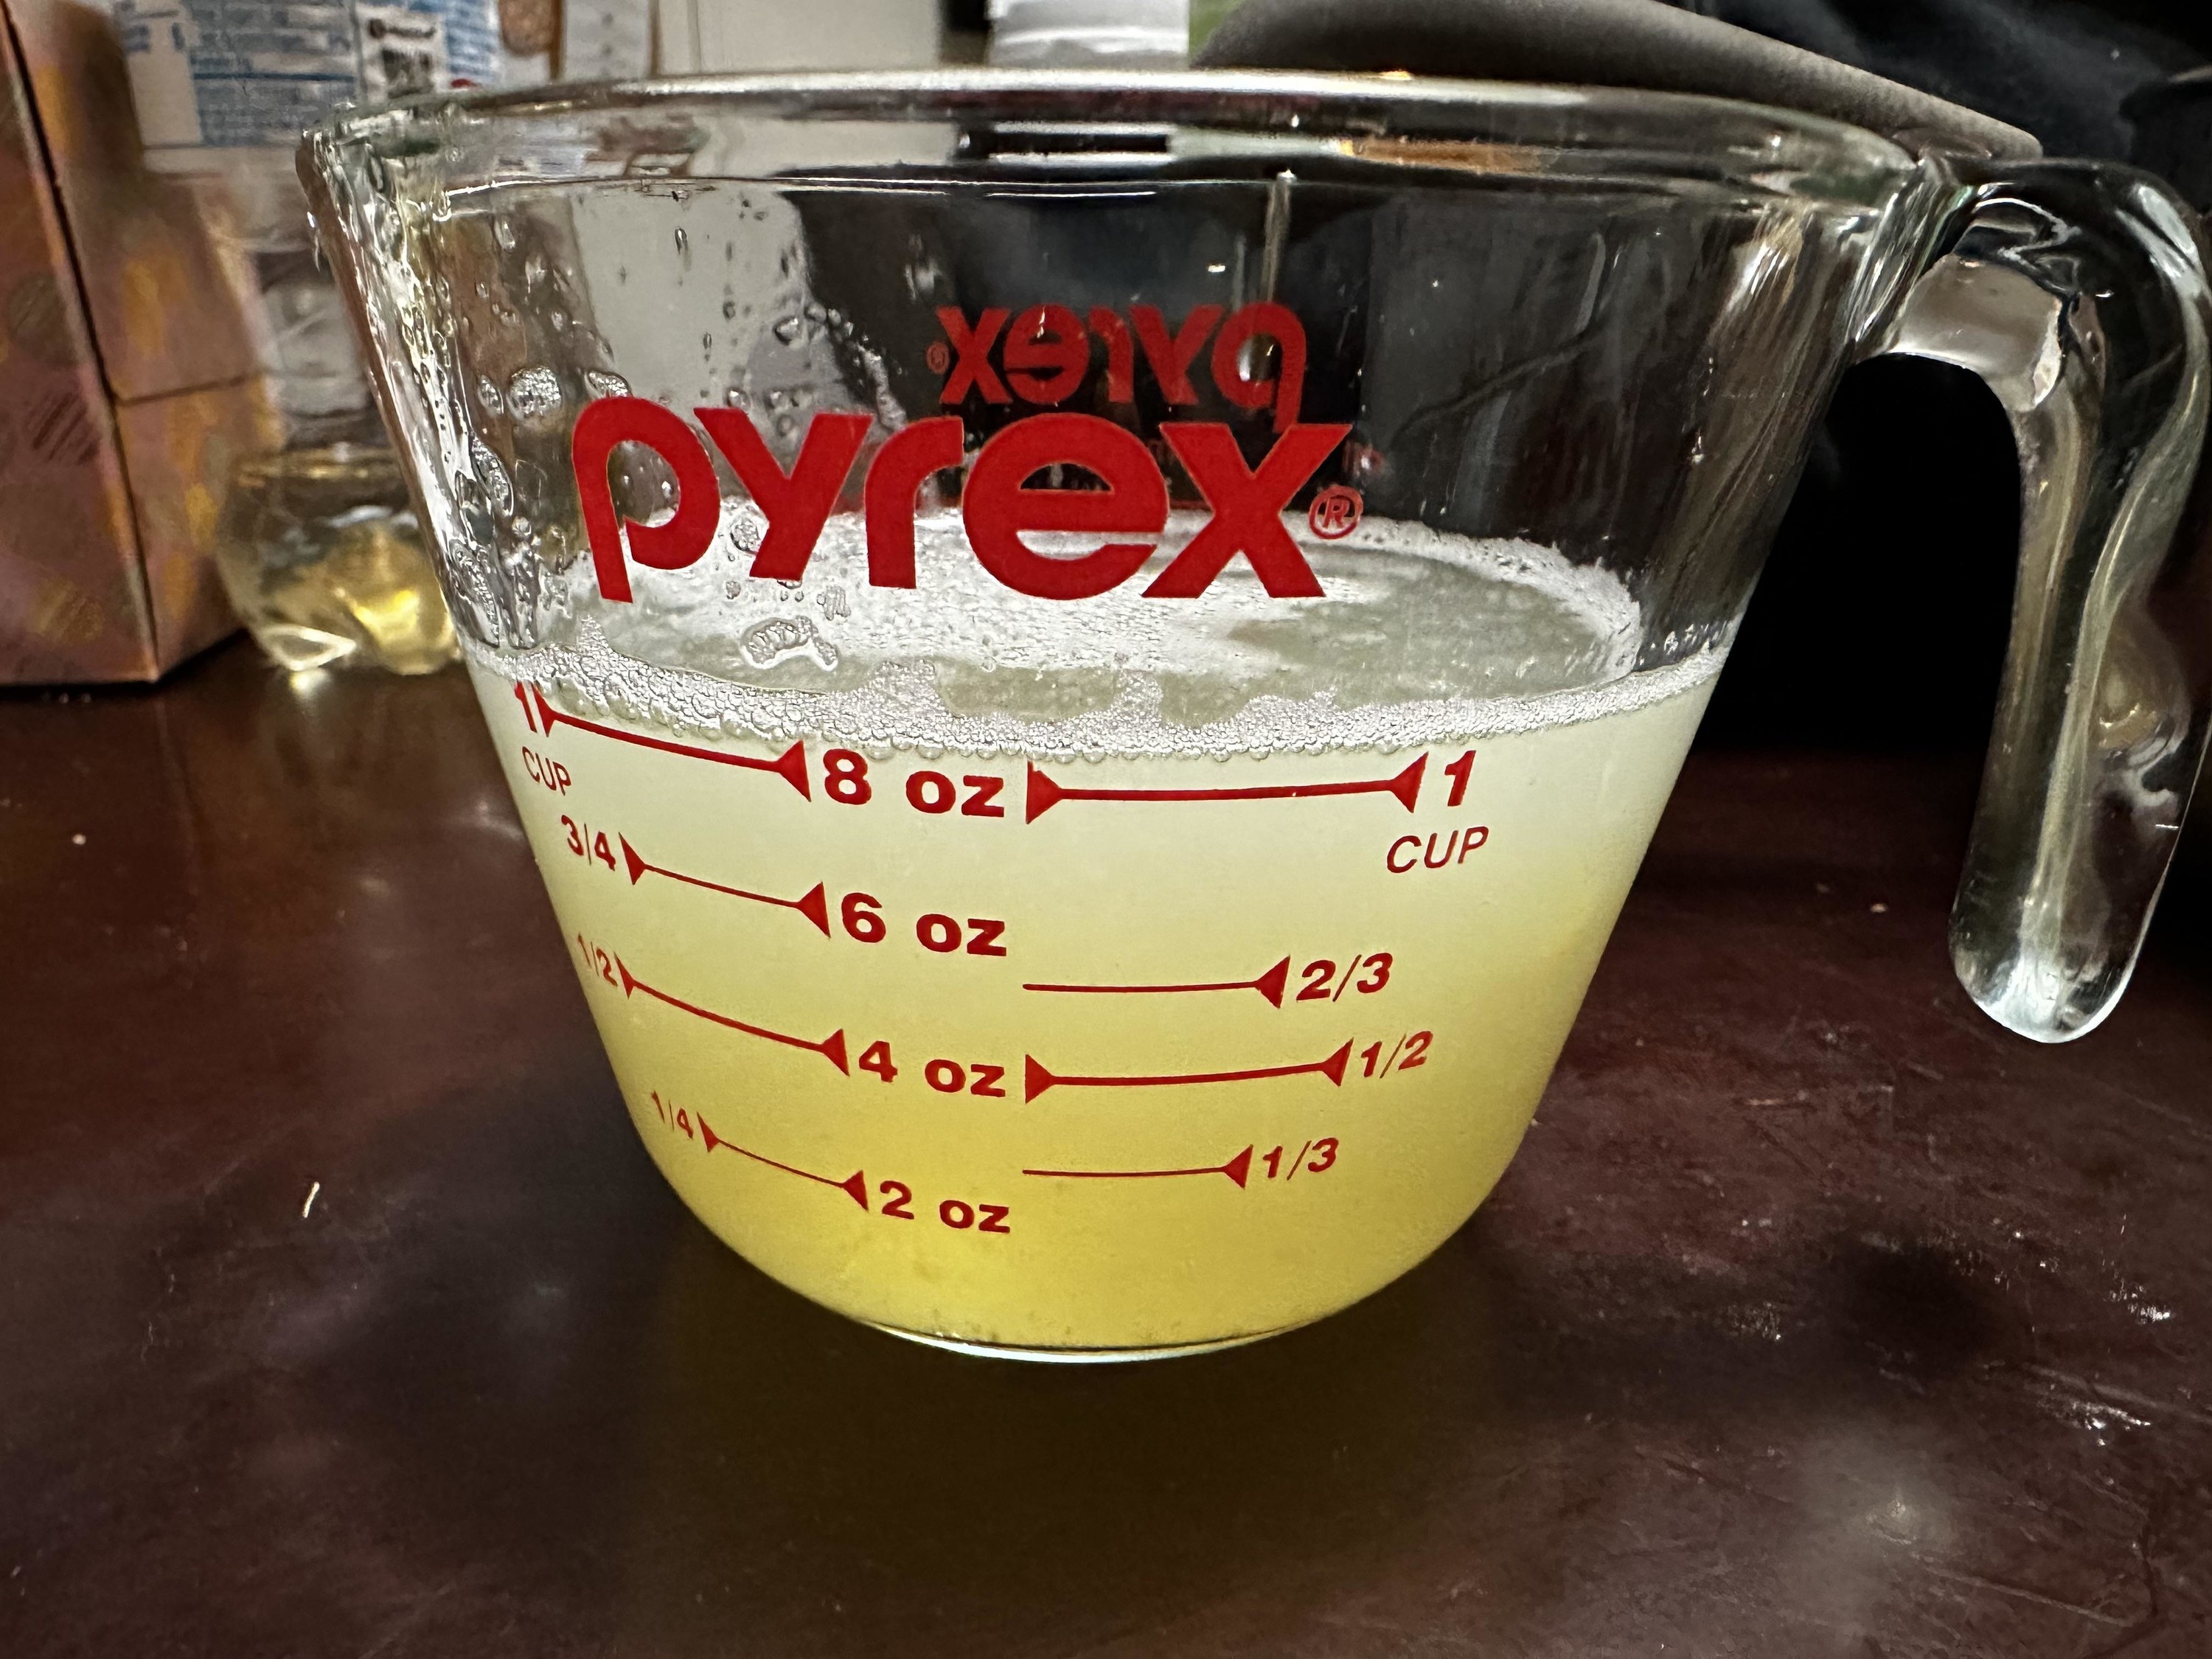 Light yellow liquid in a measuring cup